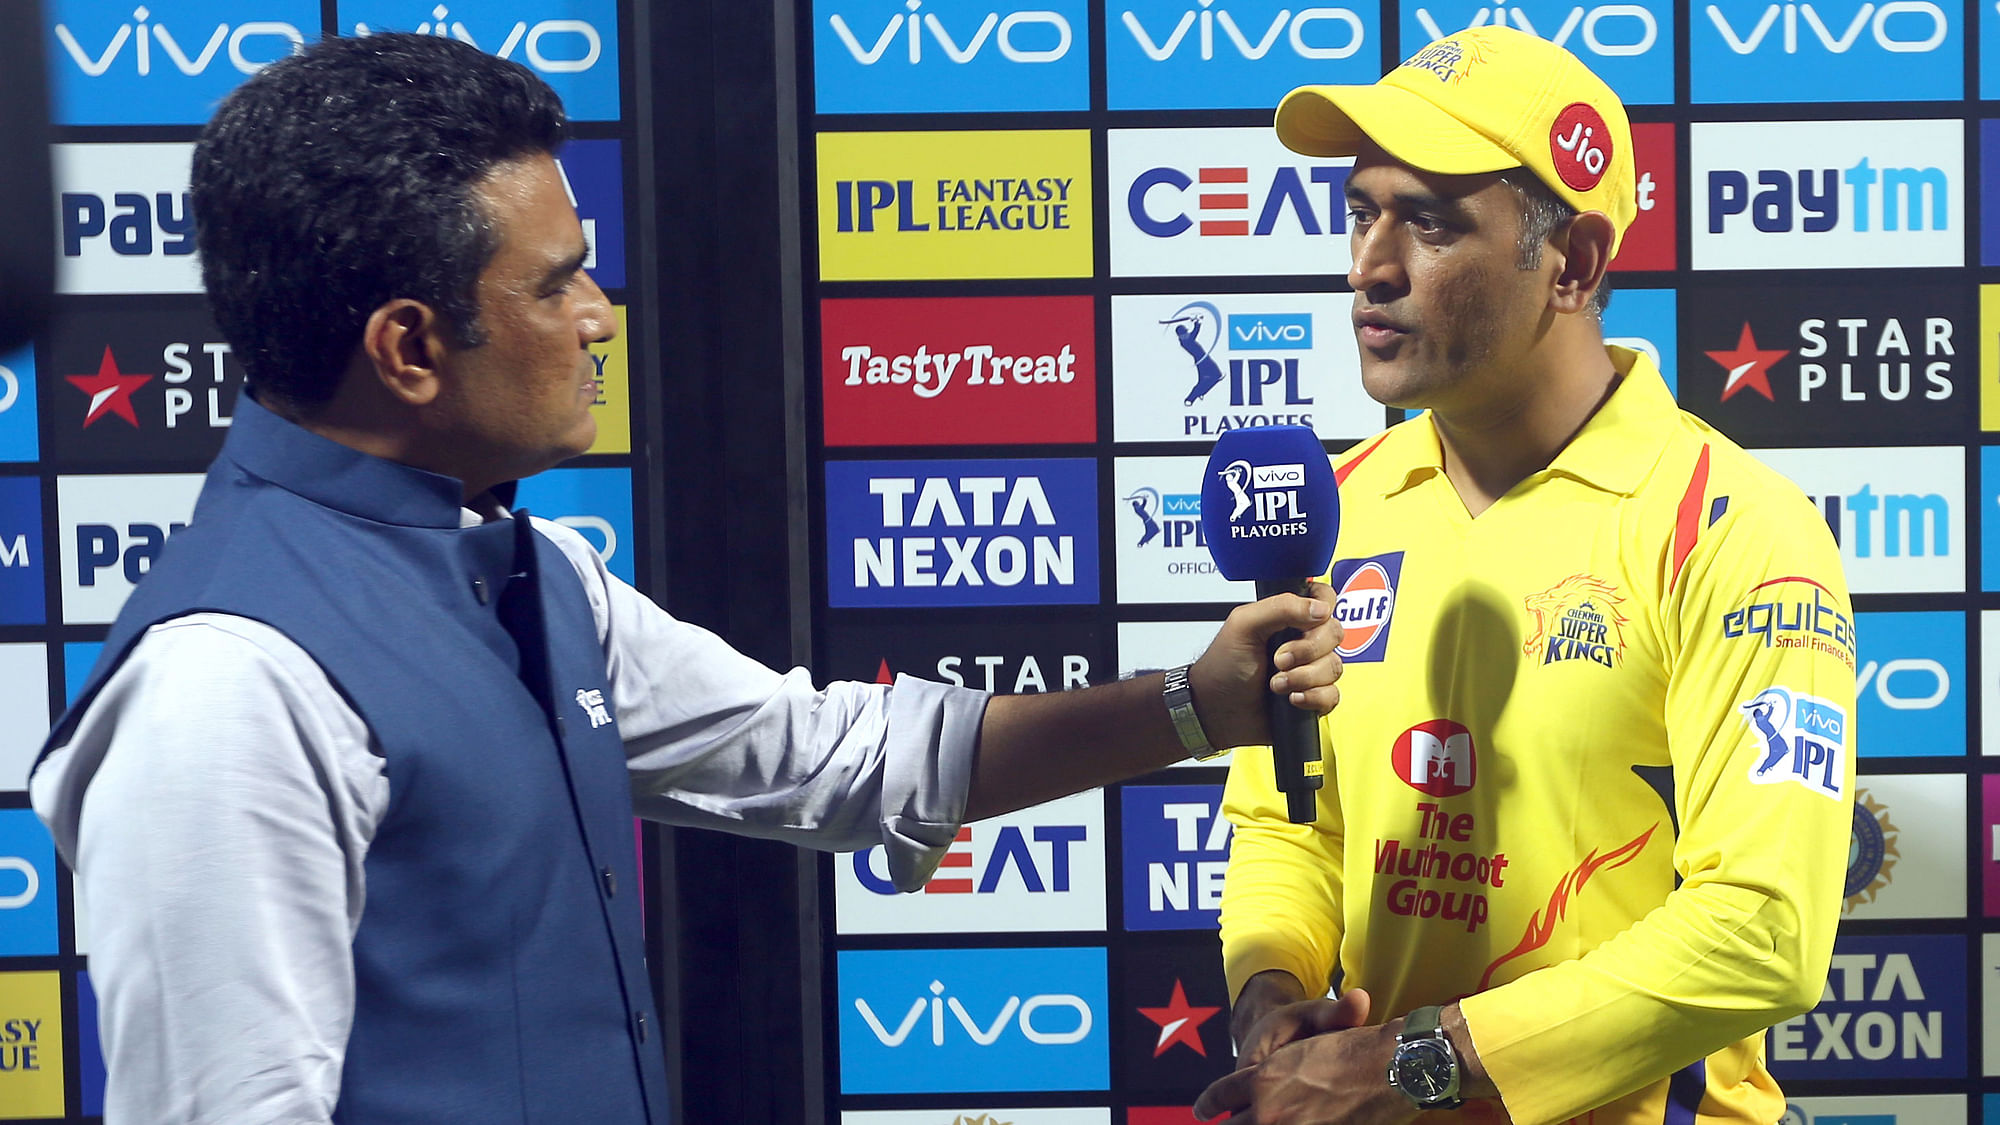 MS Dhoni speaks to Sanjay Manjrekar after the Qualifier 1 match against Sunrisers Hyderabad in Mumbai.